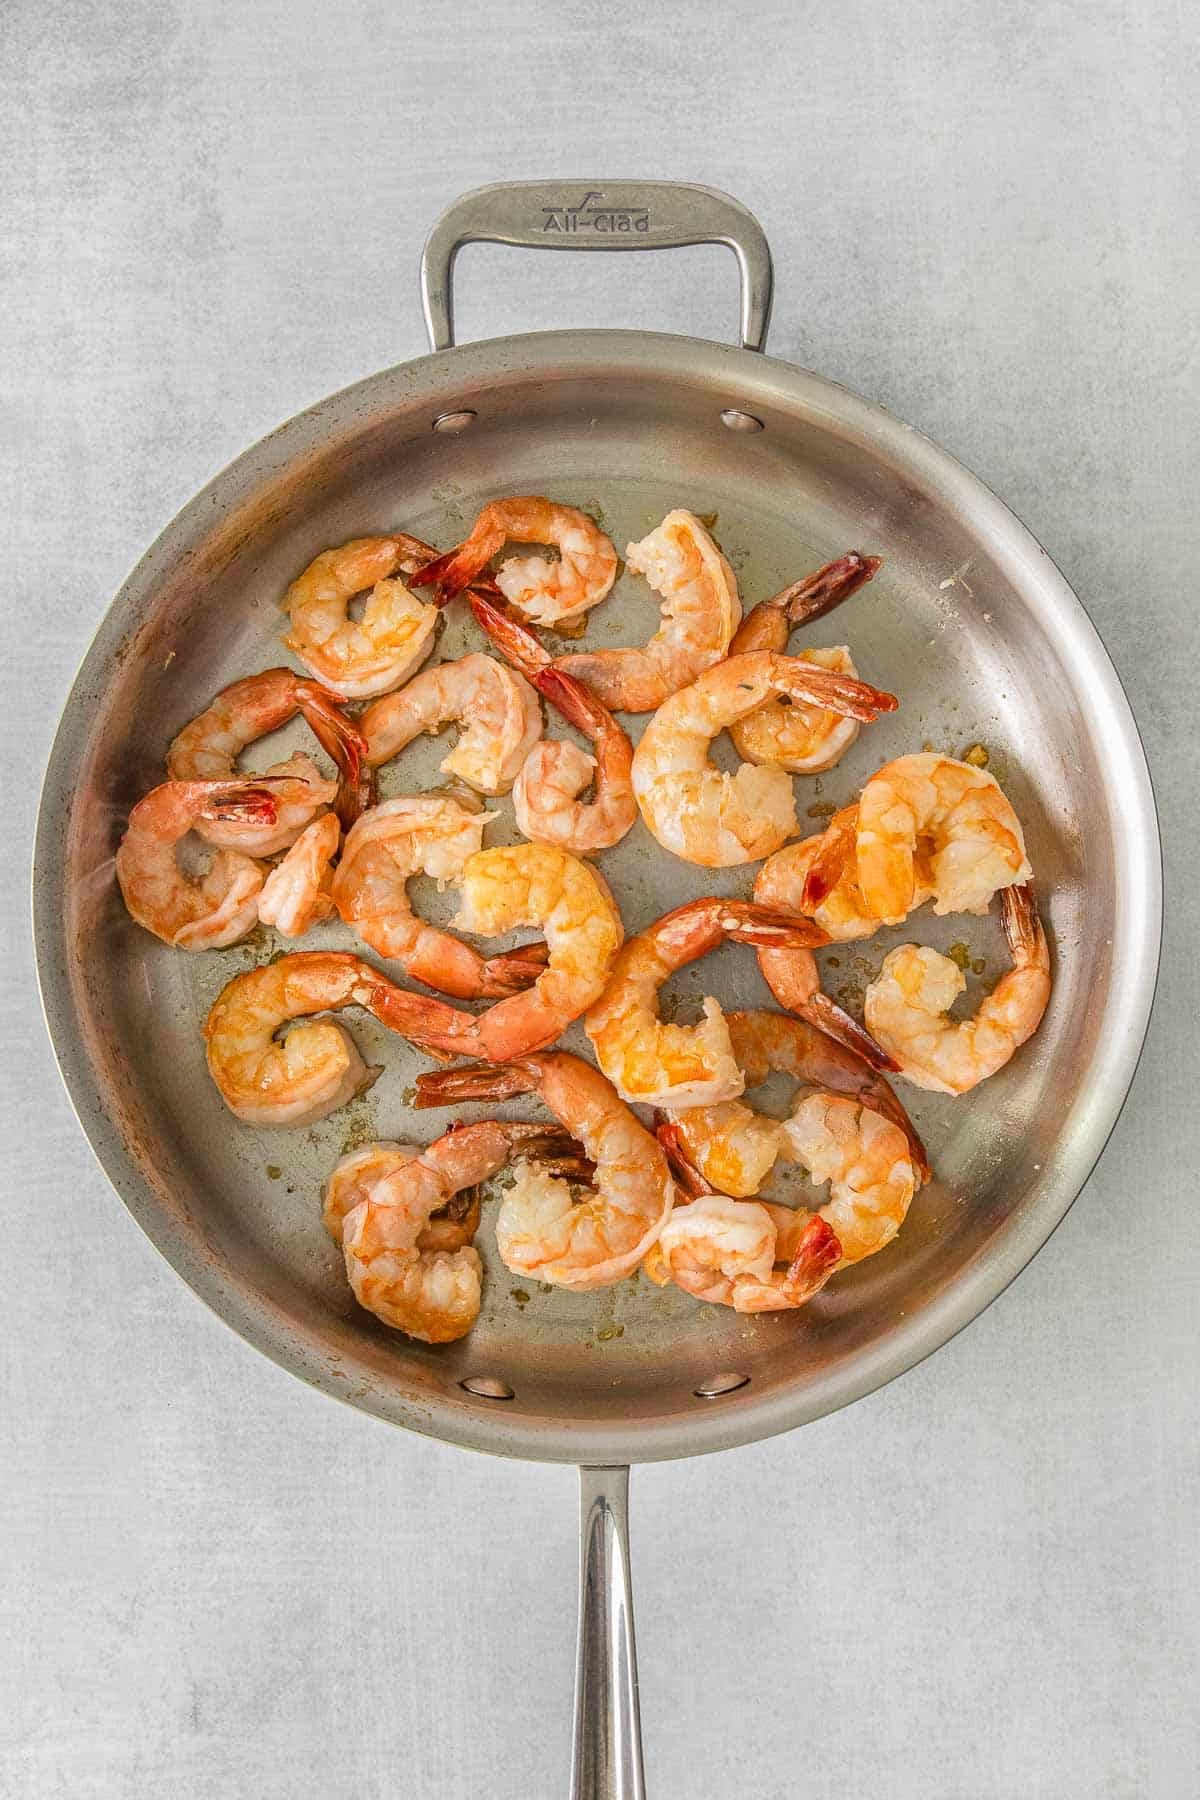 Stainless steel skillet with several cooked shrimp.